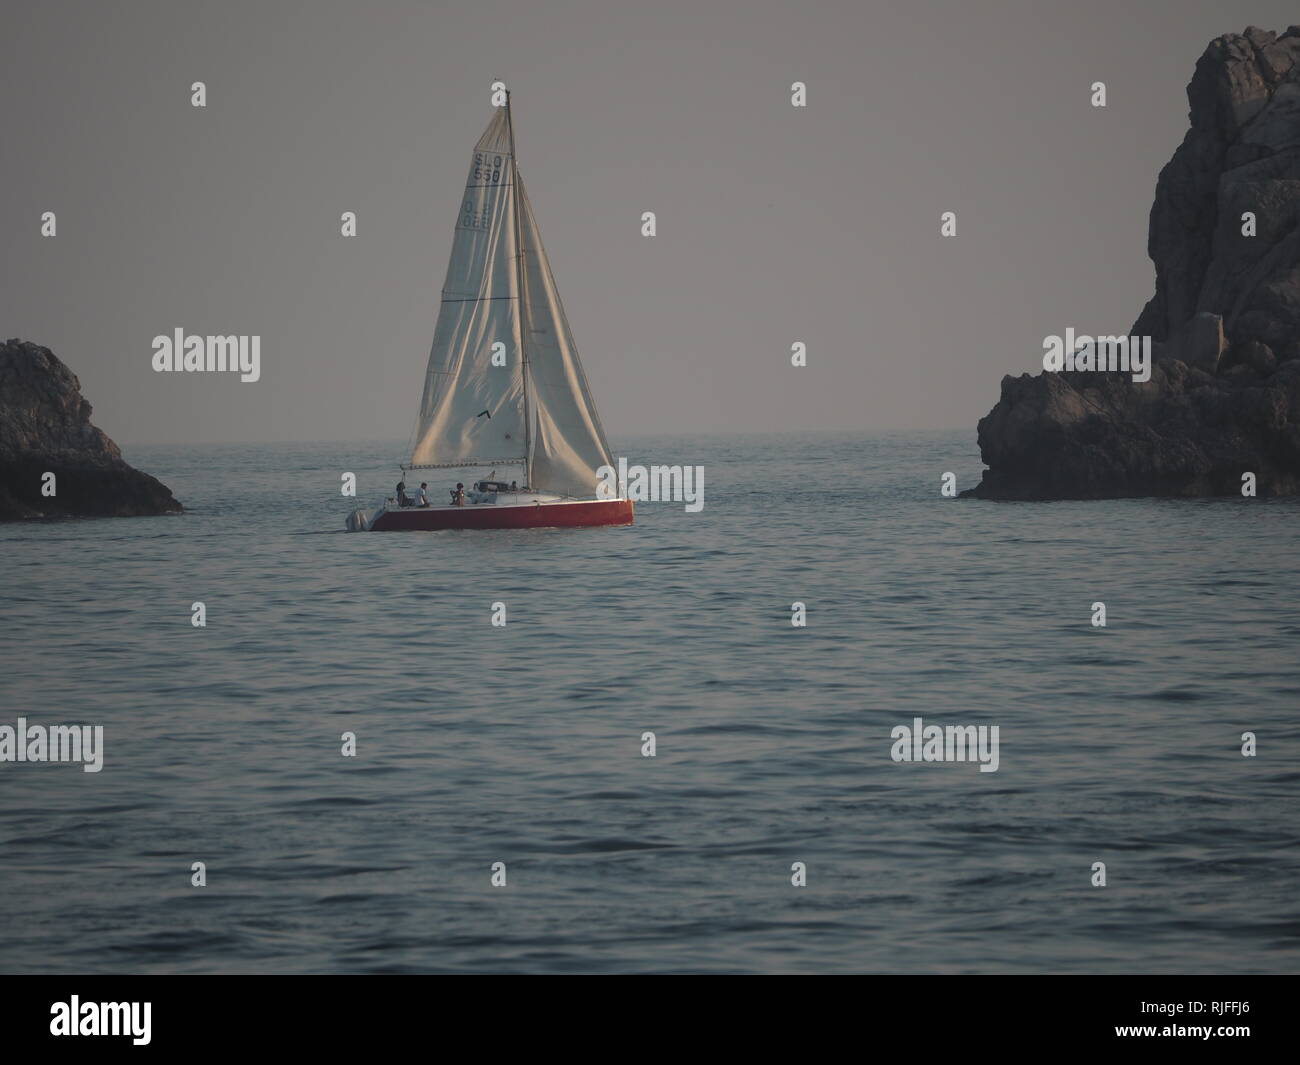 A red yacht sails on the Adriatic Sea outside Dubrovnik on a summer evening. Stock Photo